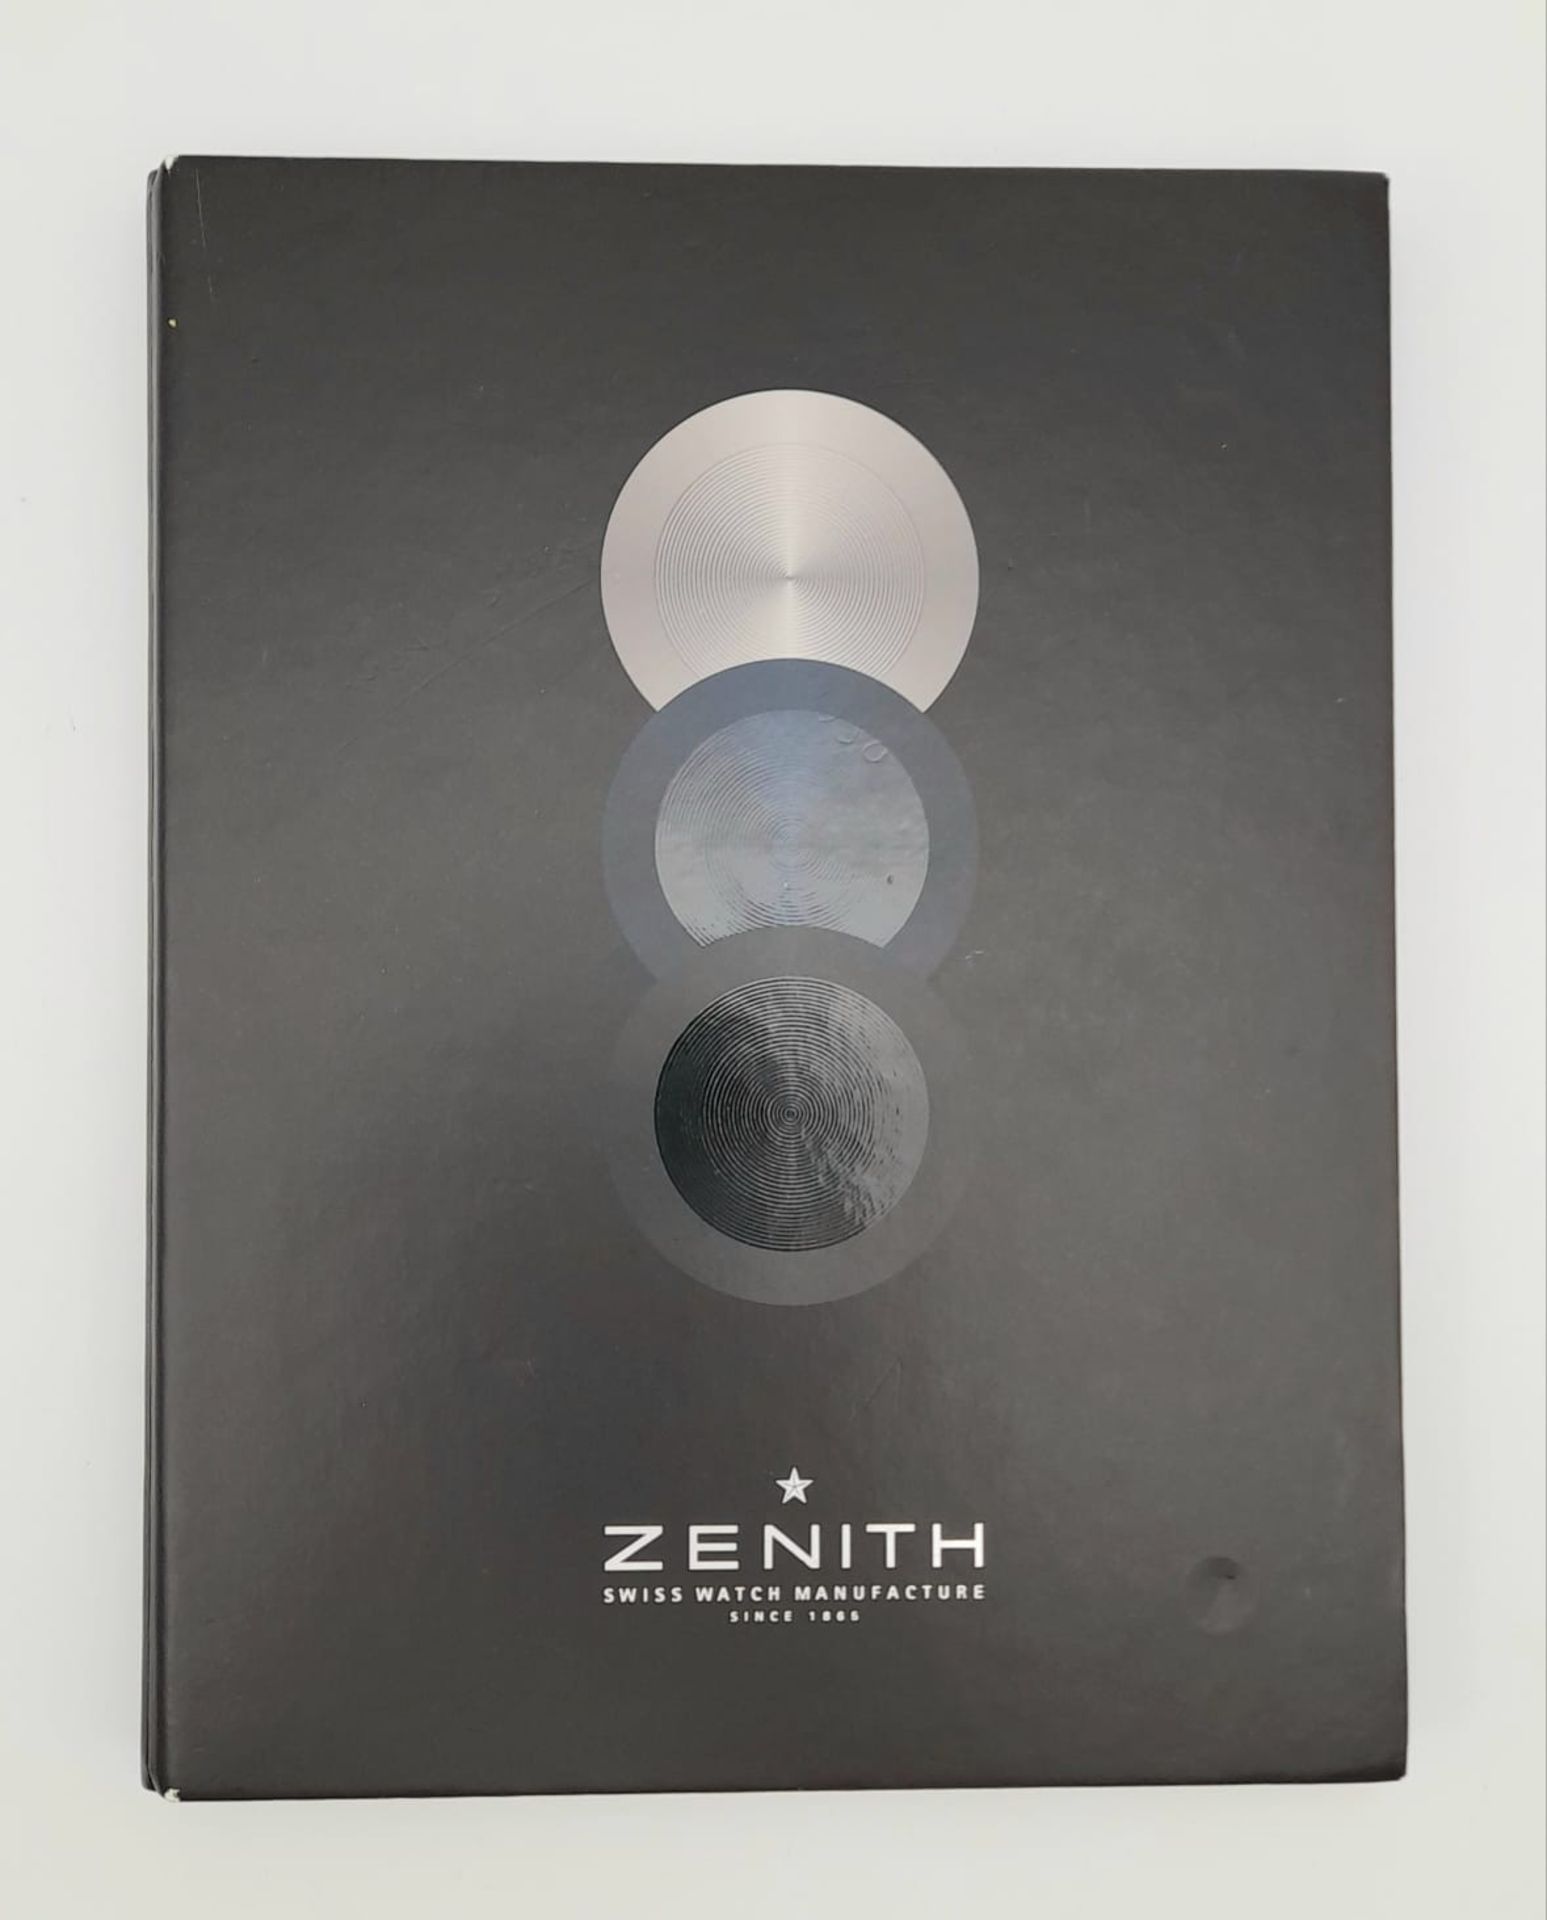 COLLECTION OF 2X ZENITH WATCH COMPANY NOTEBOOKS WITH A ZENITH BOOKMARK - Image 2 of 16